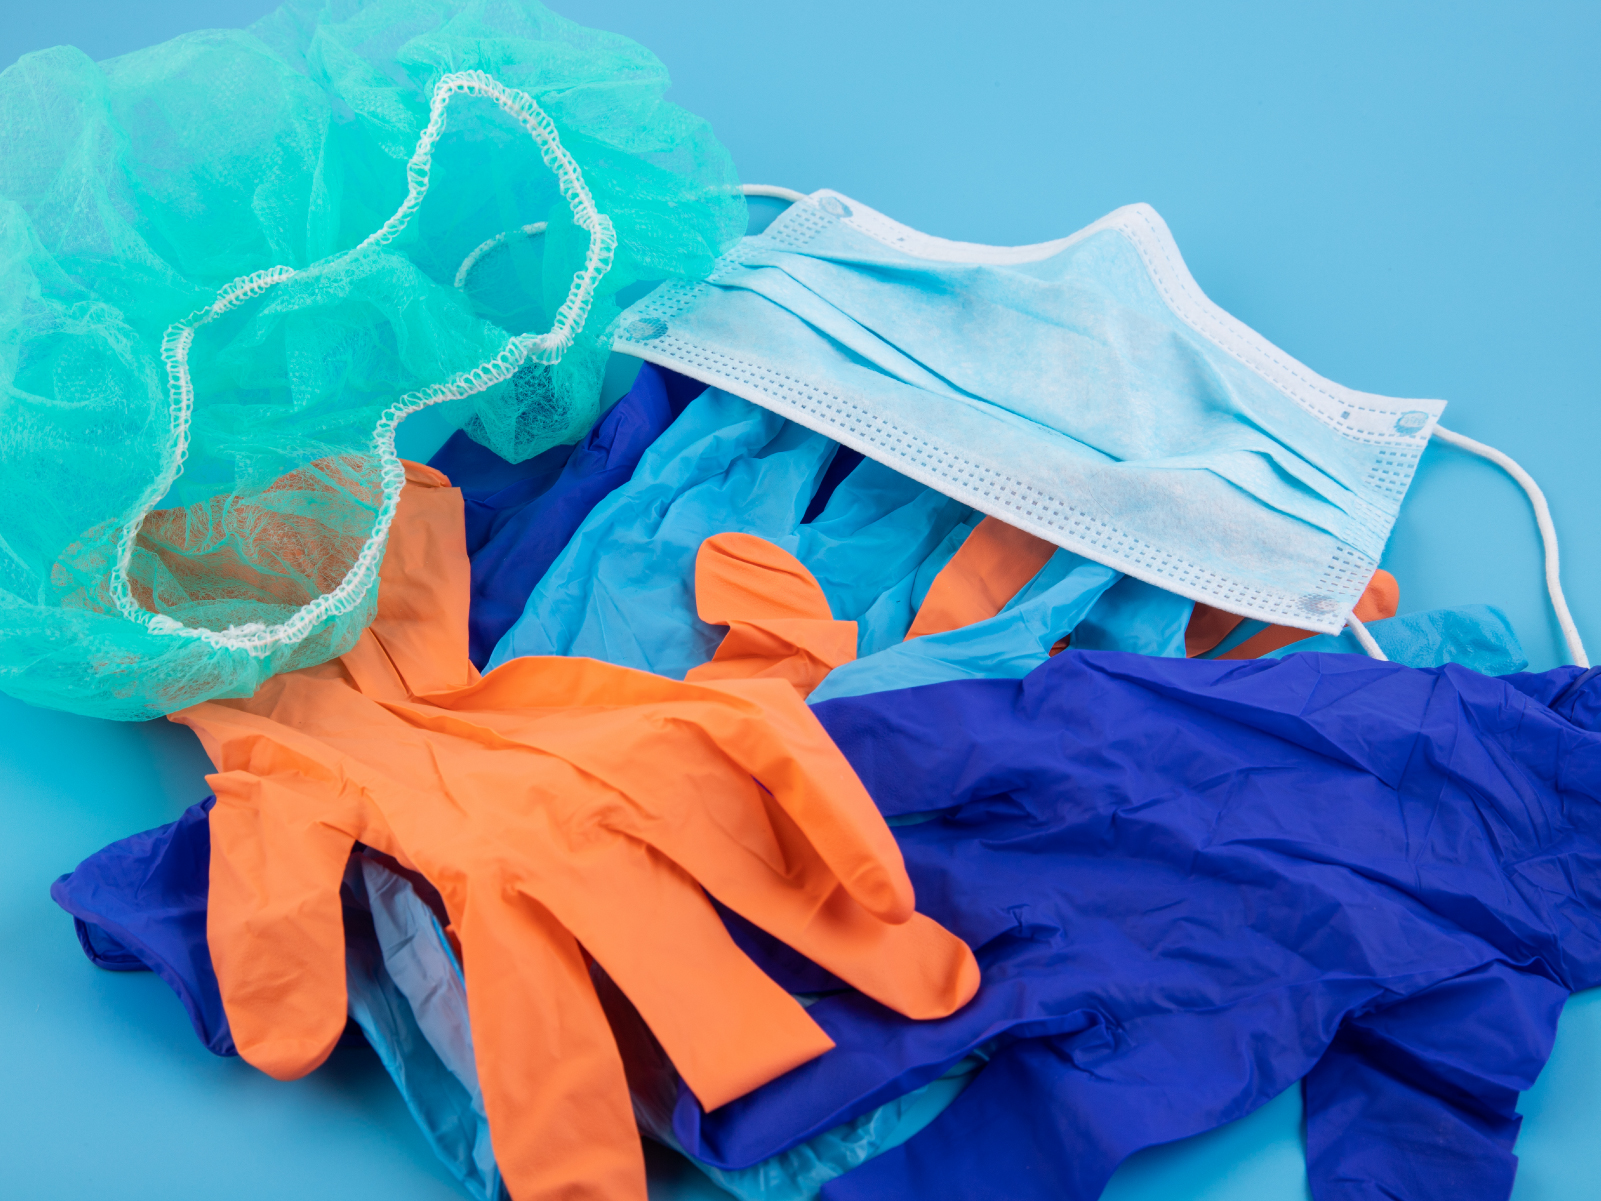 a used pile of disposable masks and gloves